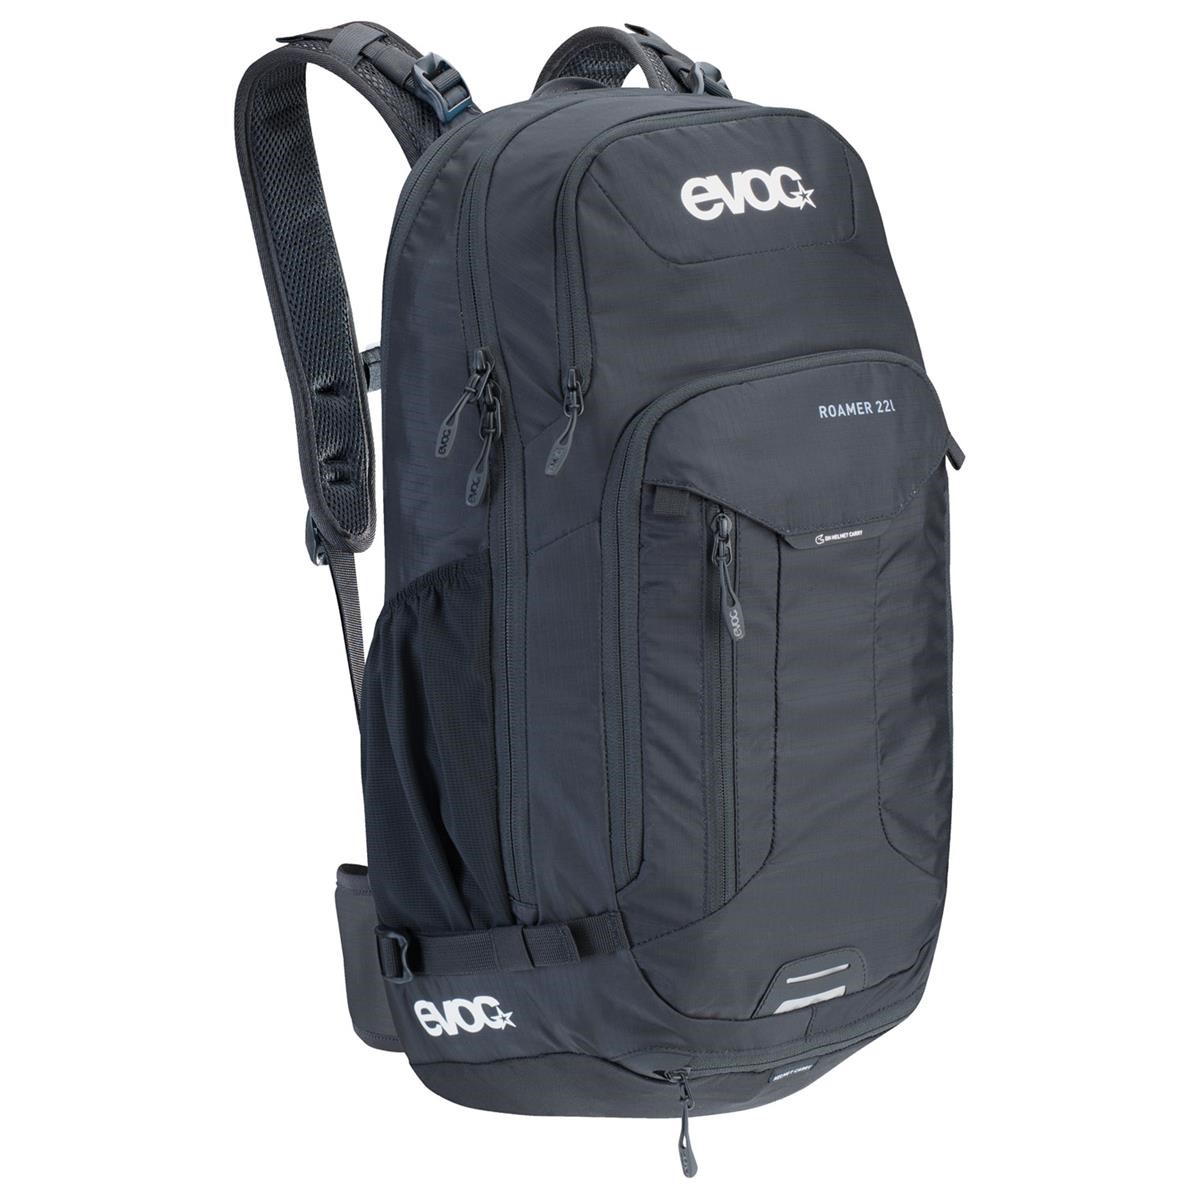 Evoc Backpack with Hydration System Compartment Roamer Black, 22 Liter